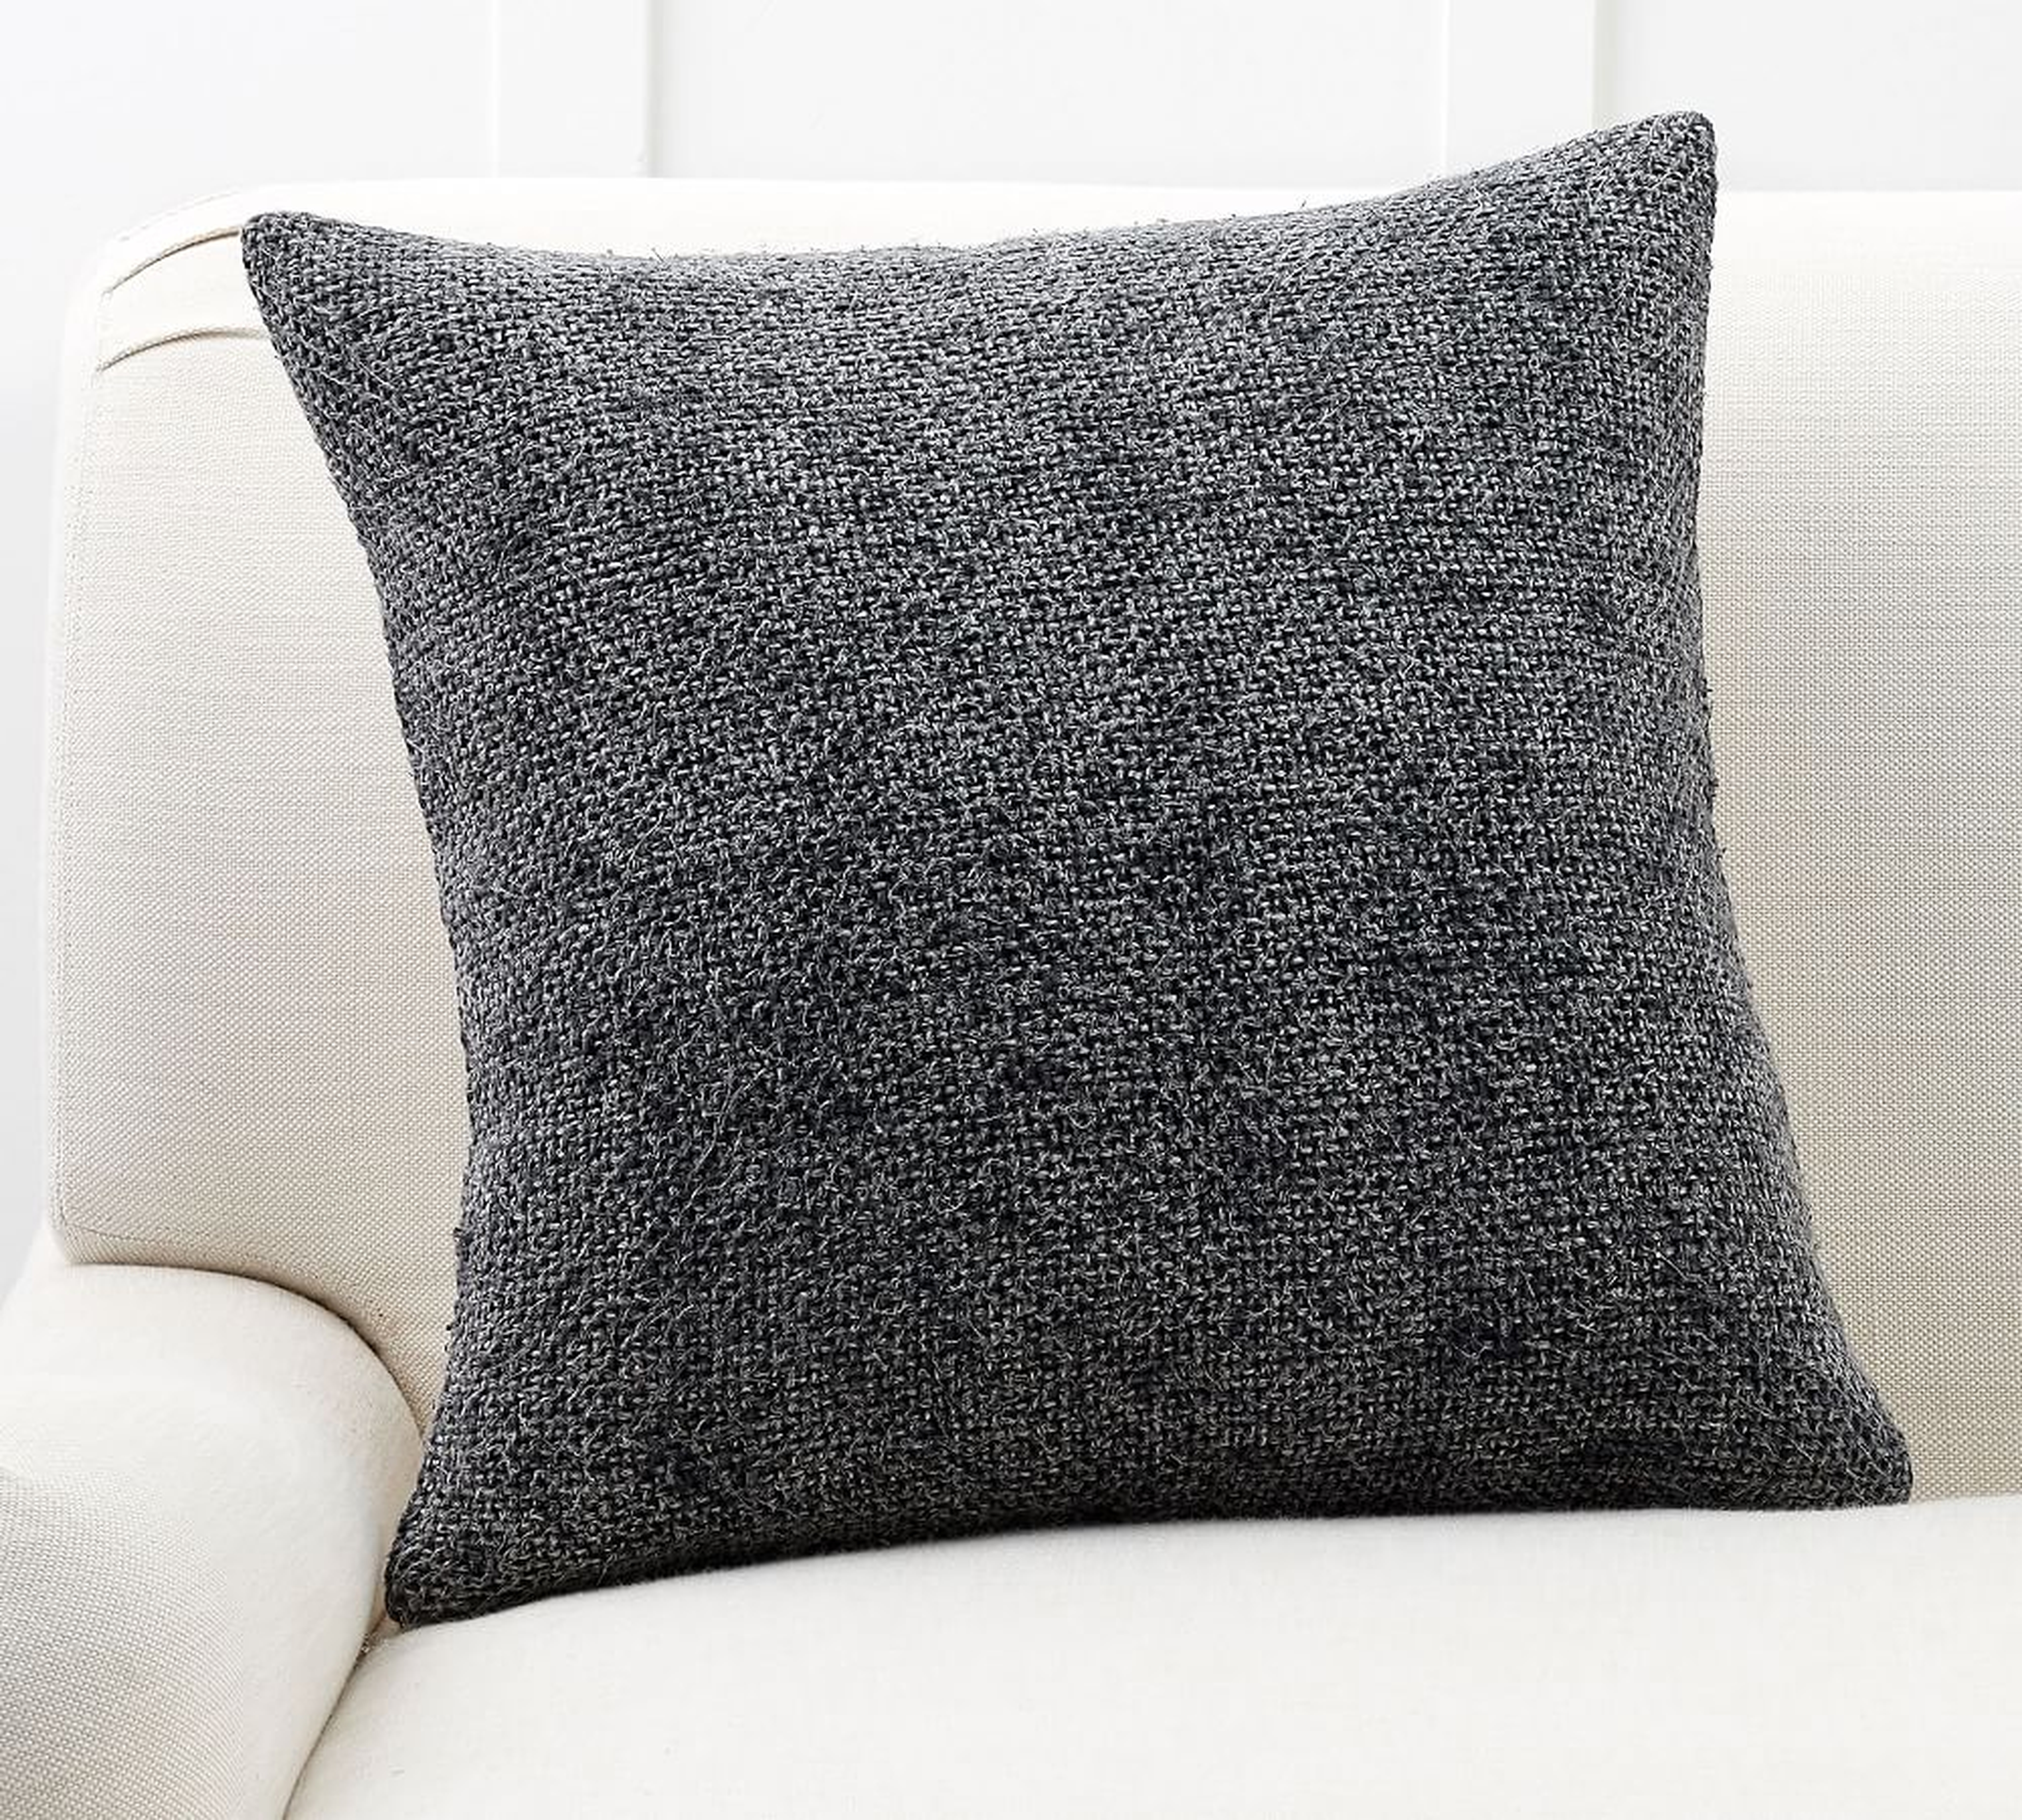 Faye Textured Linen Pillow Cover - Set of 2, 20 x 20", Charcoal - Pottery Barn